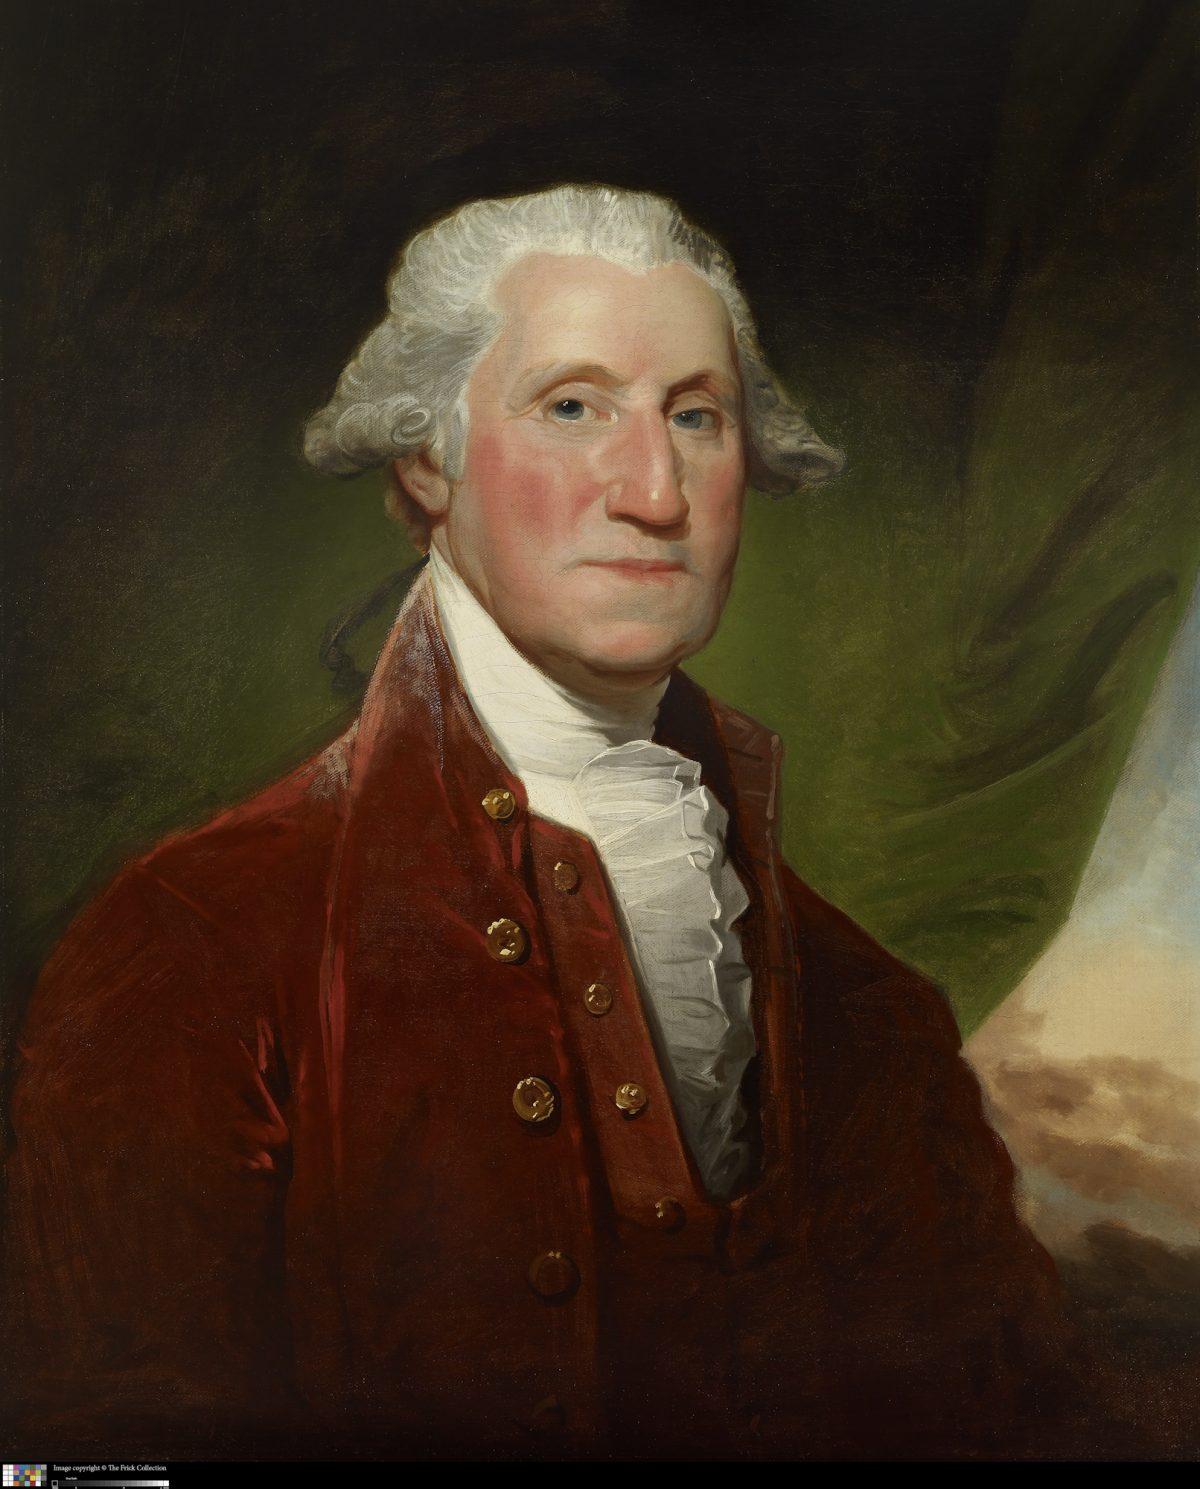 "George Washington," 1795, by Gilbert Stuart (1755–1828). Oil on canvas, 29 1/4 inches by 24 inches, The Frick Collection. (Michael Bodycomb)